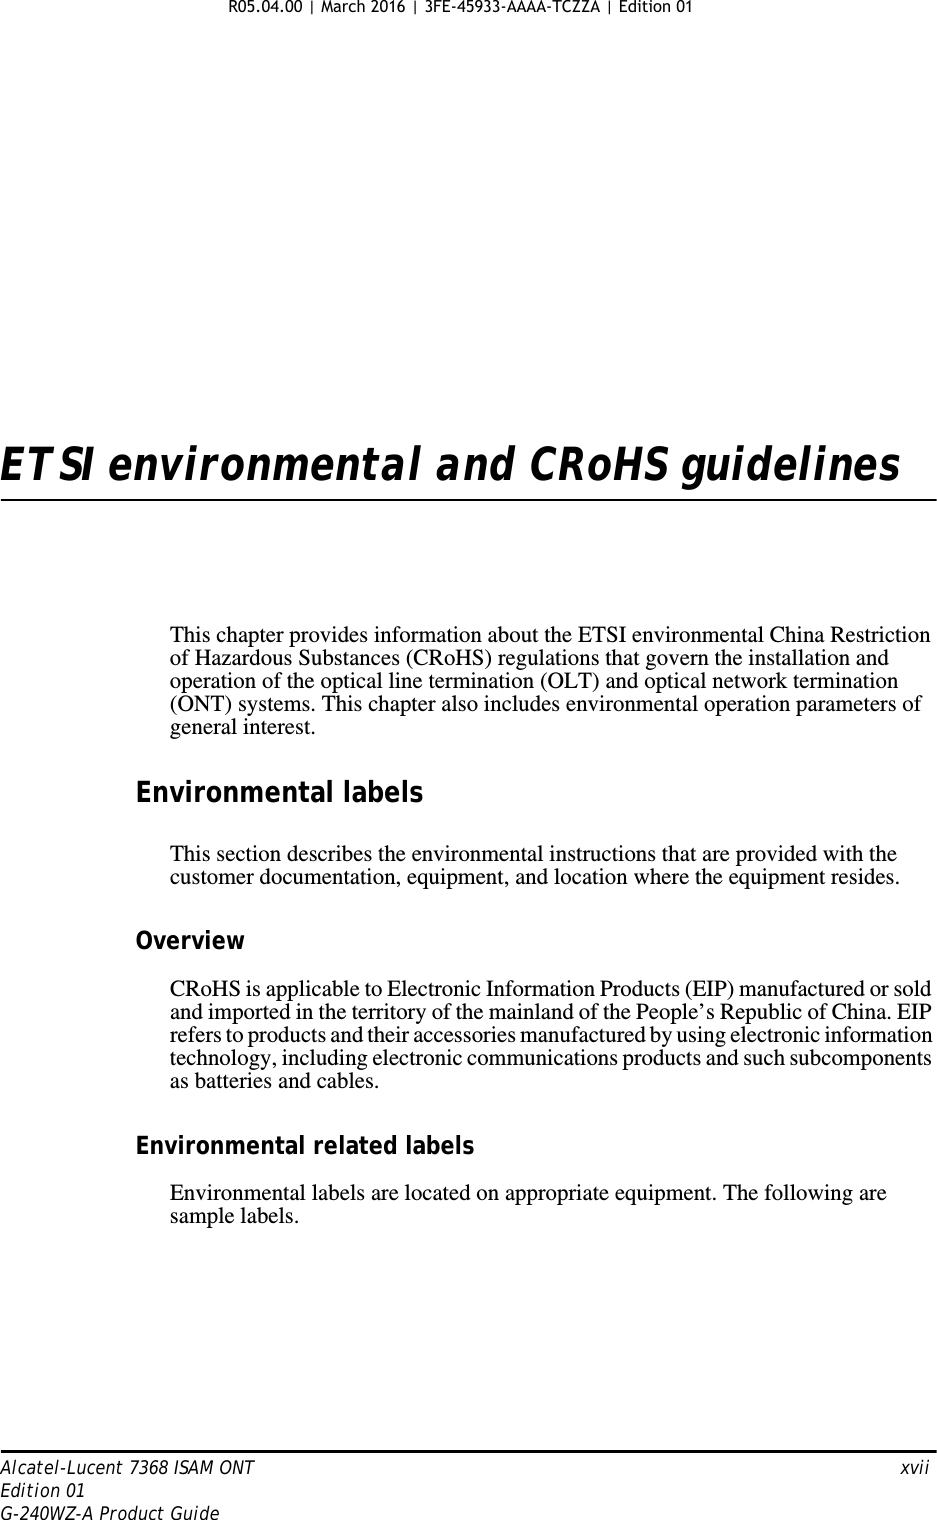 Alcatel-Lucent 7368 ISAM ONT   xviiEdition 01G-240WZ-A Product GuideETSI environmental and CRoHS guidelinesThis chapter provides information about the ETSI environmental China Restriction of Hazardous Substances (CRoHS) regulations that govern the installation and operation of the optical line termination (OLT) and optical network termination (ONT) systems. This chapter also includes environmental operation parameters of general interest.Environmental labelsThis section describes the environmental instructions that are provided with the customer documentation, equipment, and location where the equipment resides.OverviewCRoHS is applicable to Electronic Information Products (EIP) manufactured or sold and imported in the territory of the mainland of the People’s Republic of China. EIP refers to products and their accessories manufactured by using electronic information technology, including electronic communications products and such subcomponents as batteries and cables.Environmental related labelsEnvironmental labels are located on appropriate equipment. The following are sample labels.R05.04.00 | March 2016 | 3FE-45933-AAAA-TCZZA | Edition 01 